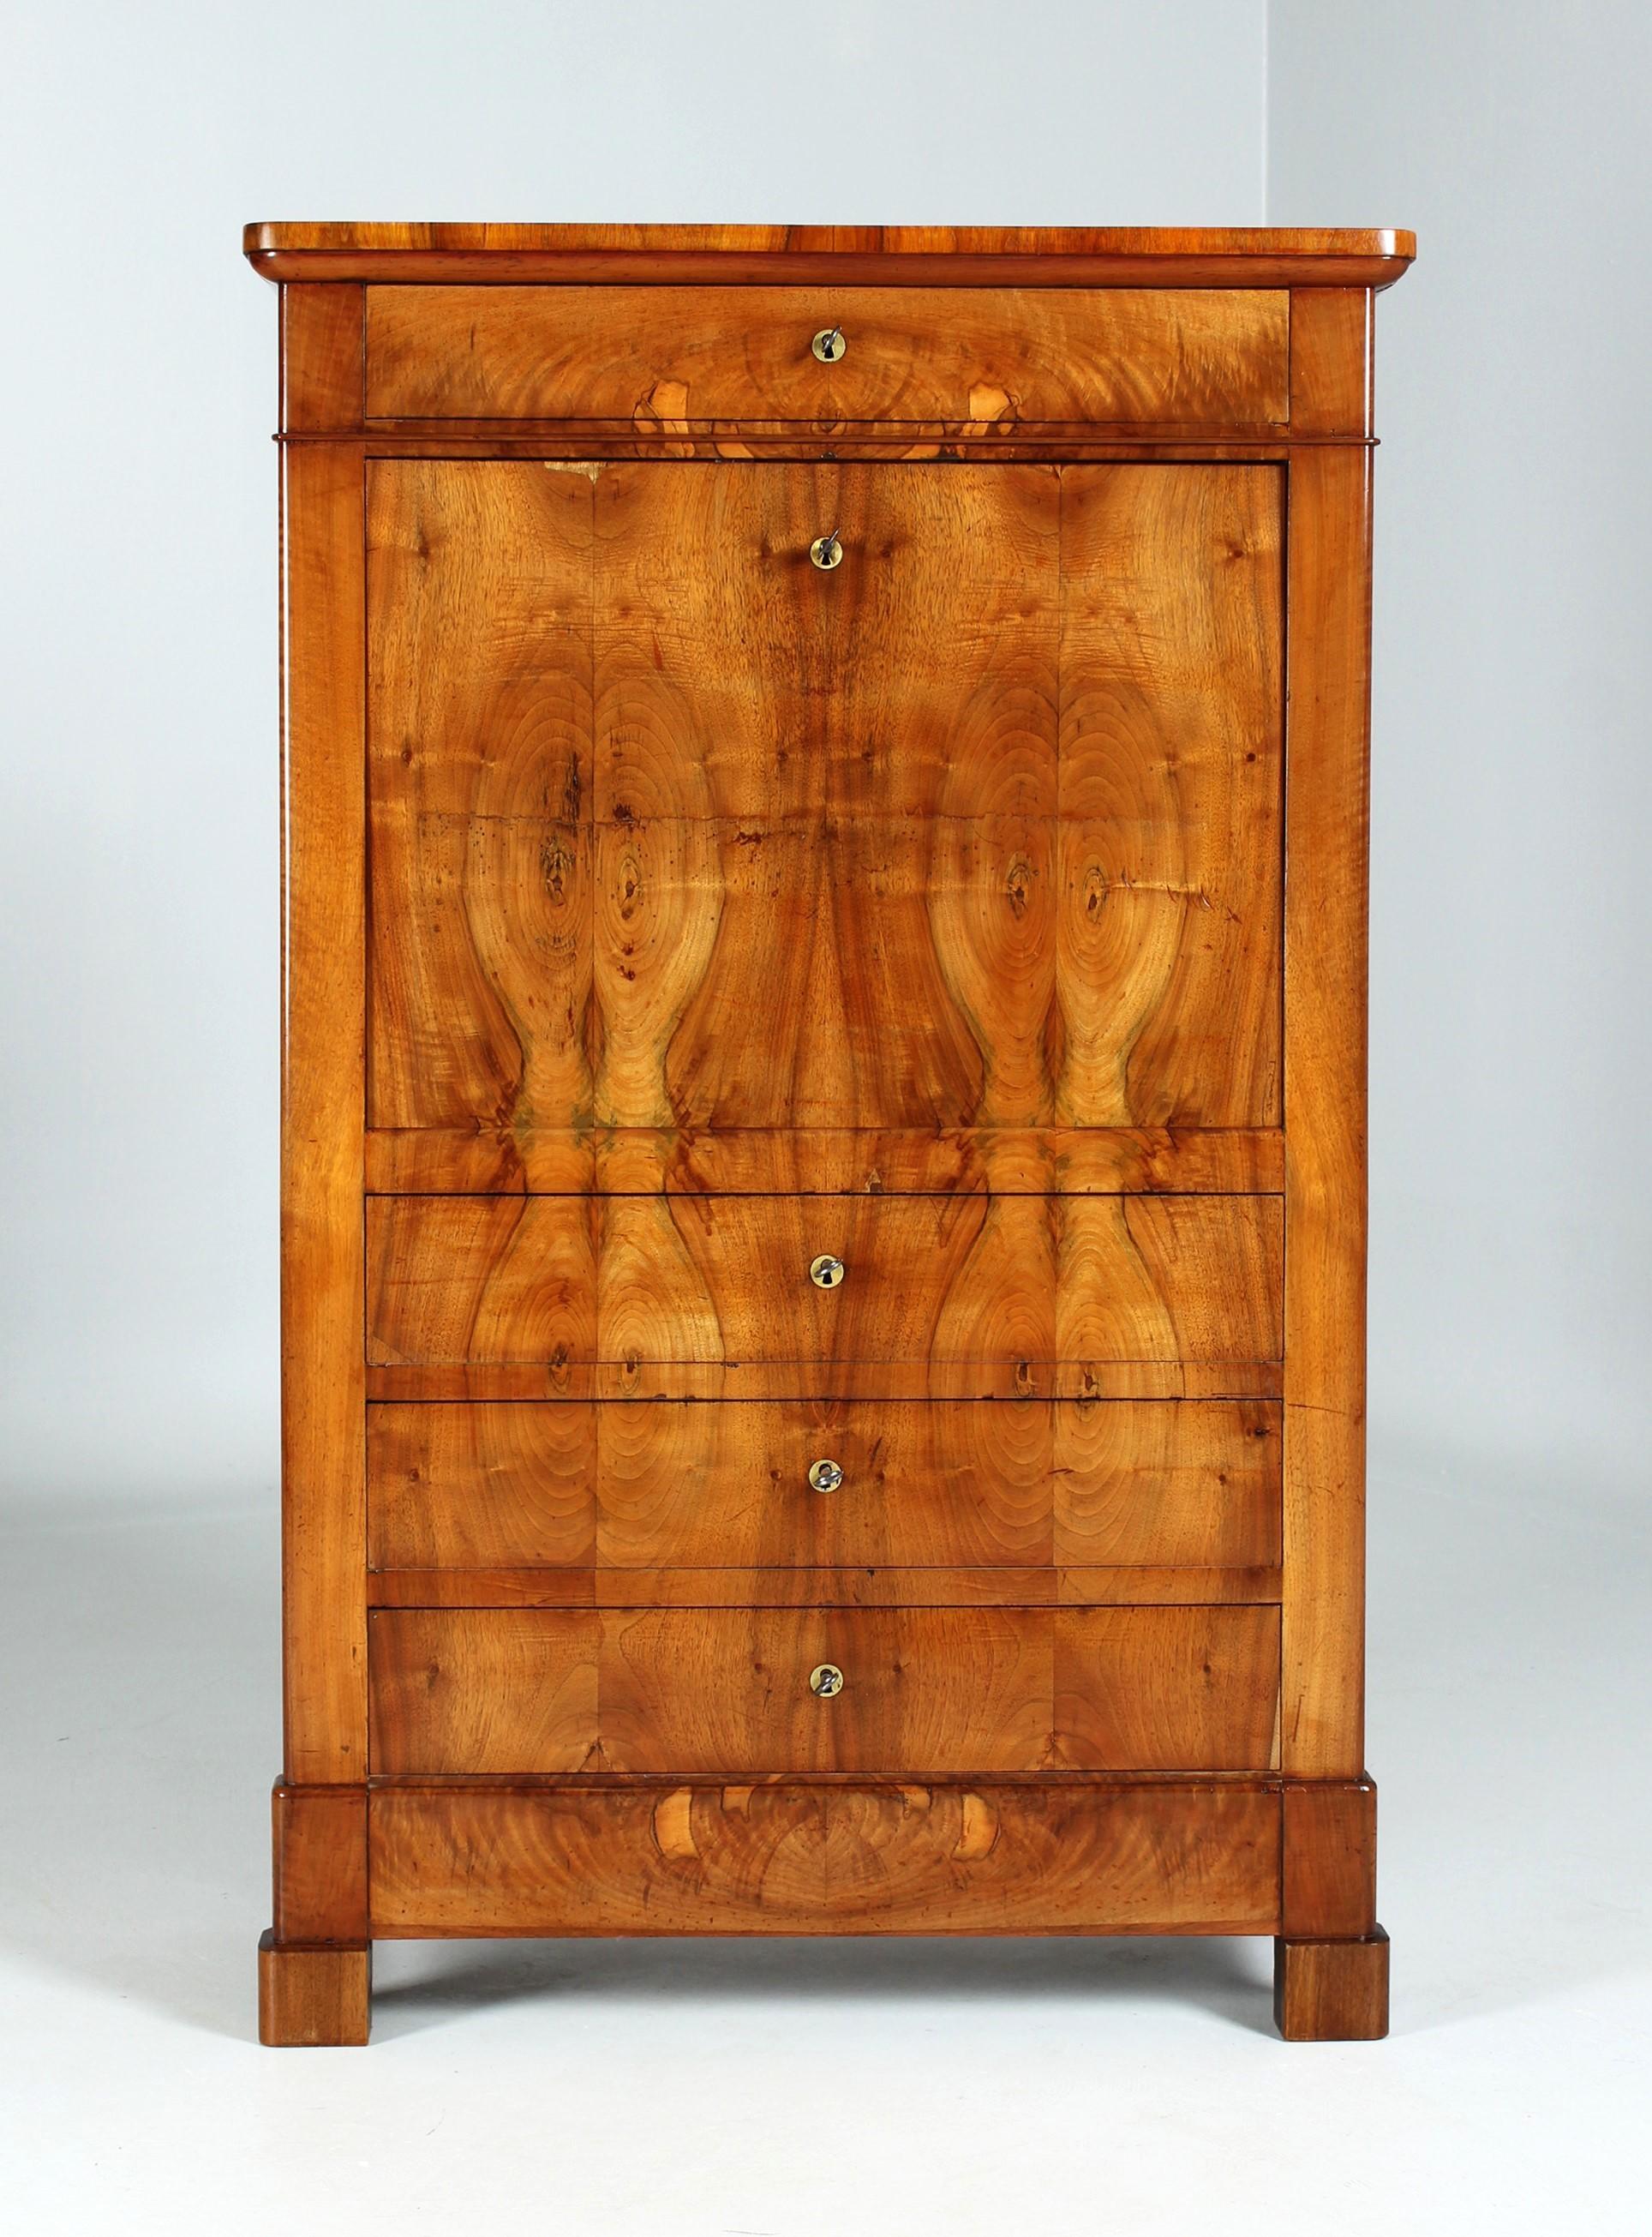 Small antique secretary

France
Walnut
Mid 19th century

Dimensions: H x W x D: 145 x 93 x 38 cm

Description:
Decorative French writing desk from the period around 1840-1860.
Body standing on block feet with three drawers at the bottom, above the